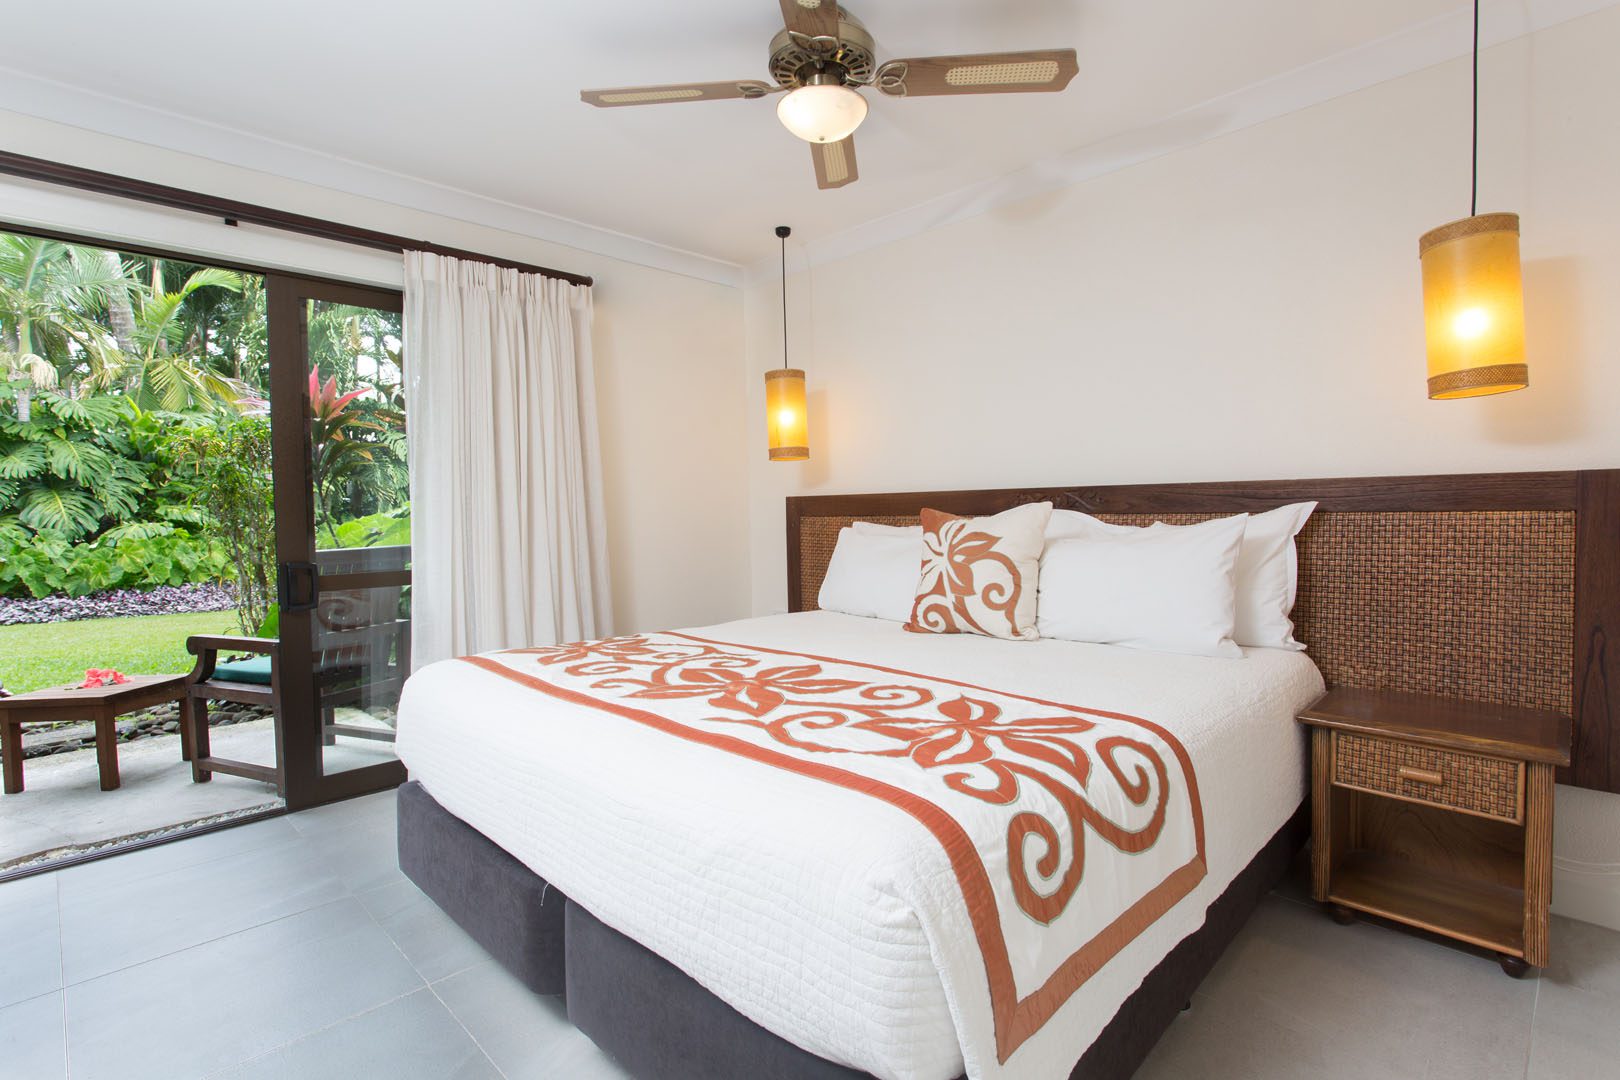 Image of the Super King-sized bed in the Standard Family Room showcasing a beautiful garden view outside the balcony